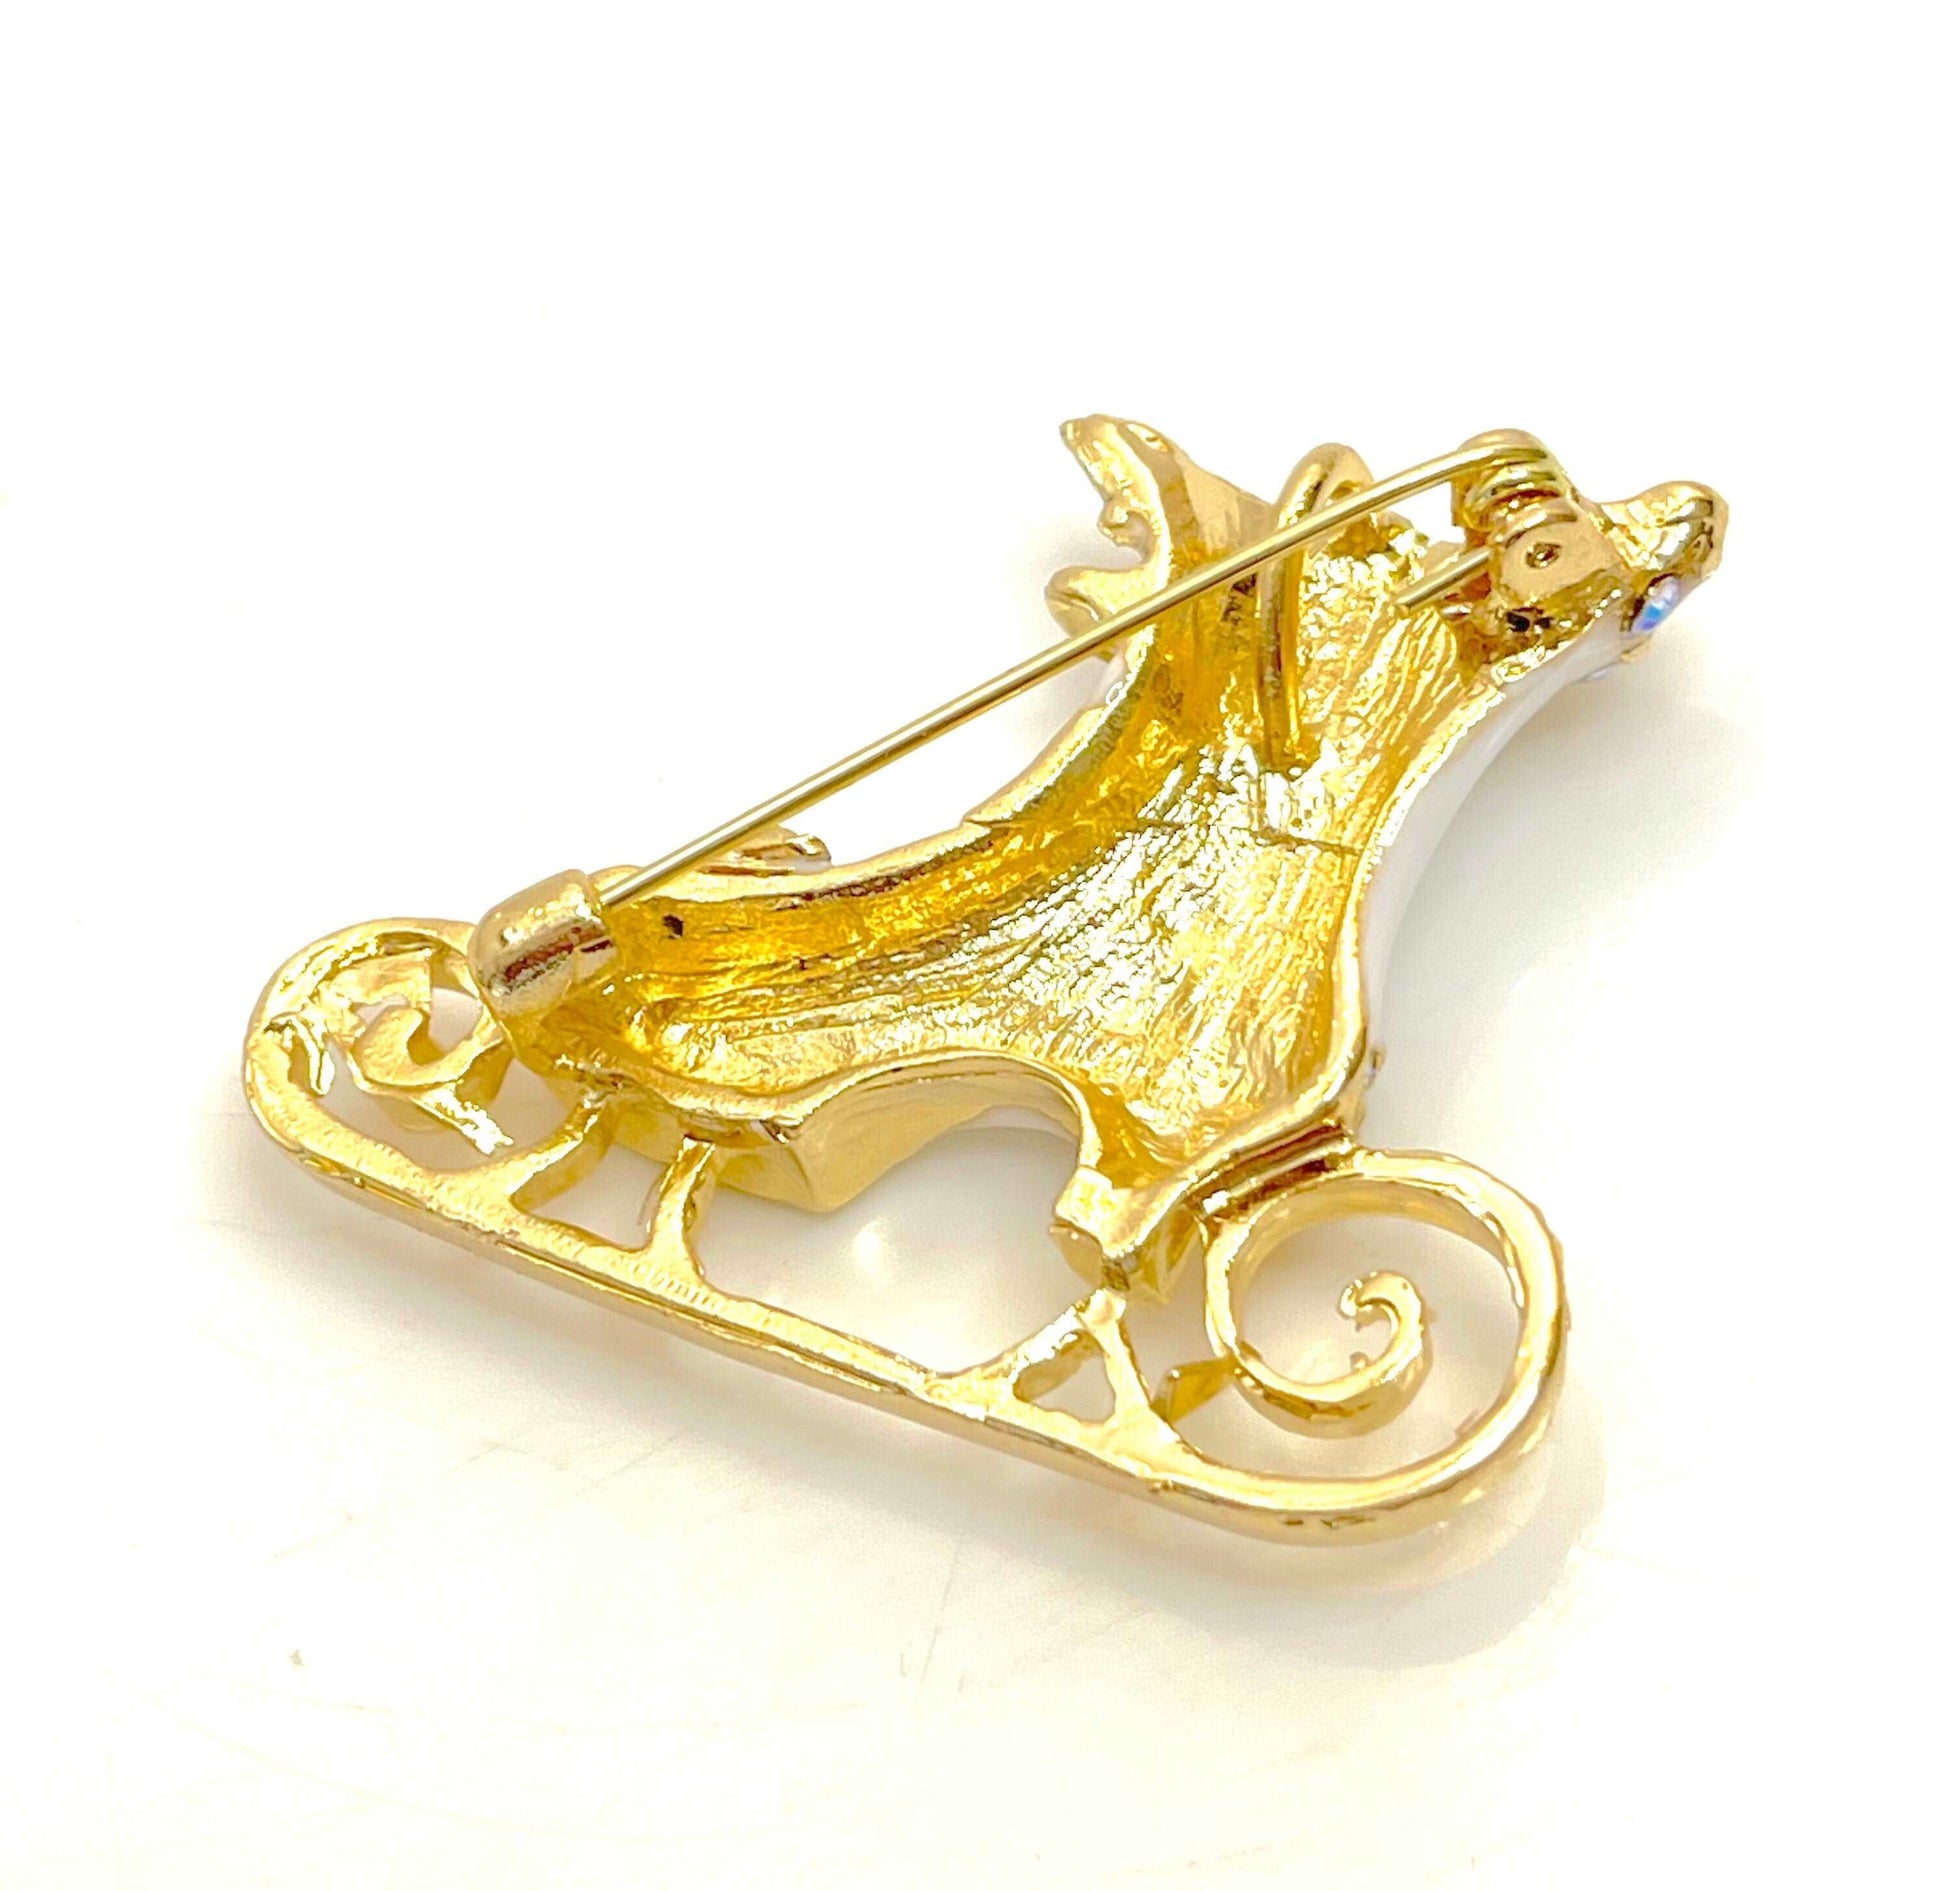 Lovely White Gold Ice Skate Brooch, Vintage Style Skate Boot, Crystal Jewelry, Ice Skating Lovers, Brooches For Women